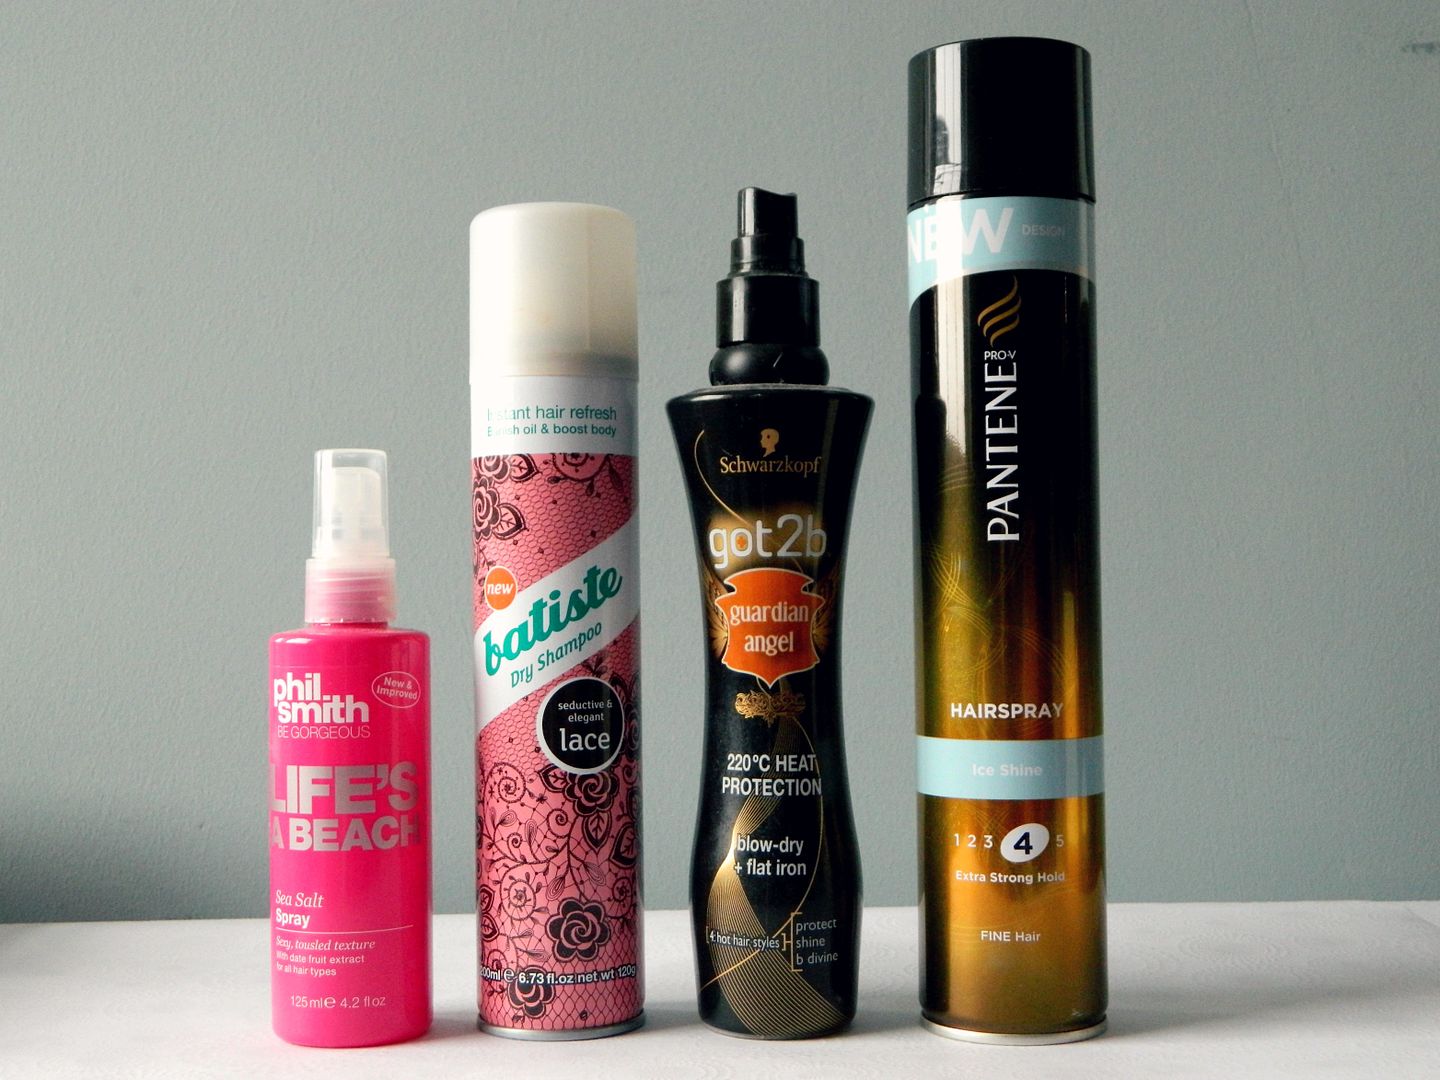 Ombre Hair Care Routine Styling Phil Smith Life's A Beach Batiste Lace Dry Shampoo Schwarzkopf Got2b Guardian Angel Pantene ice Shine Hairspray Belle-amie Review